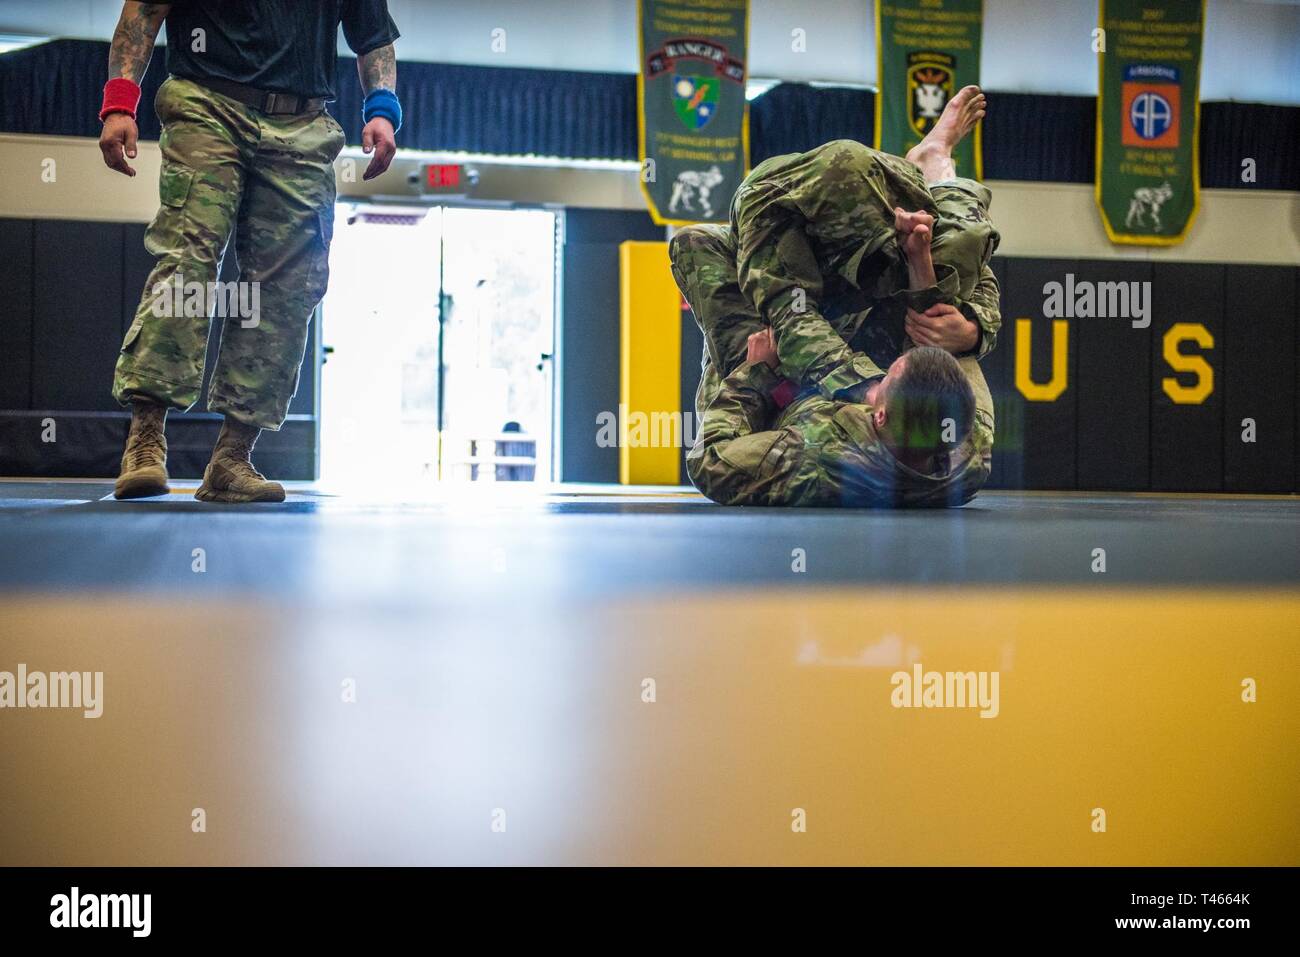 (FORT BENNING, Ga) – Soldiers from the Maneuver Center of Excellence and Fort Benning compete in day one of the Maneuver Center of Excellence best warrior competition, March 4, 2019, at various locations on Post. The three-day event is designed to identify the best Noncommissioned Officers and Soldiers. Stock Photo